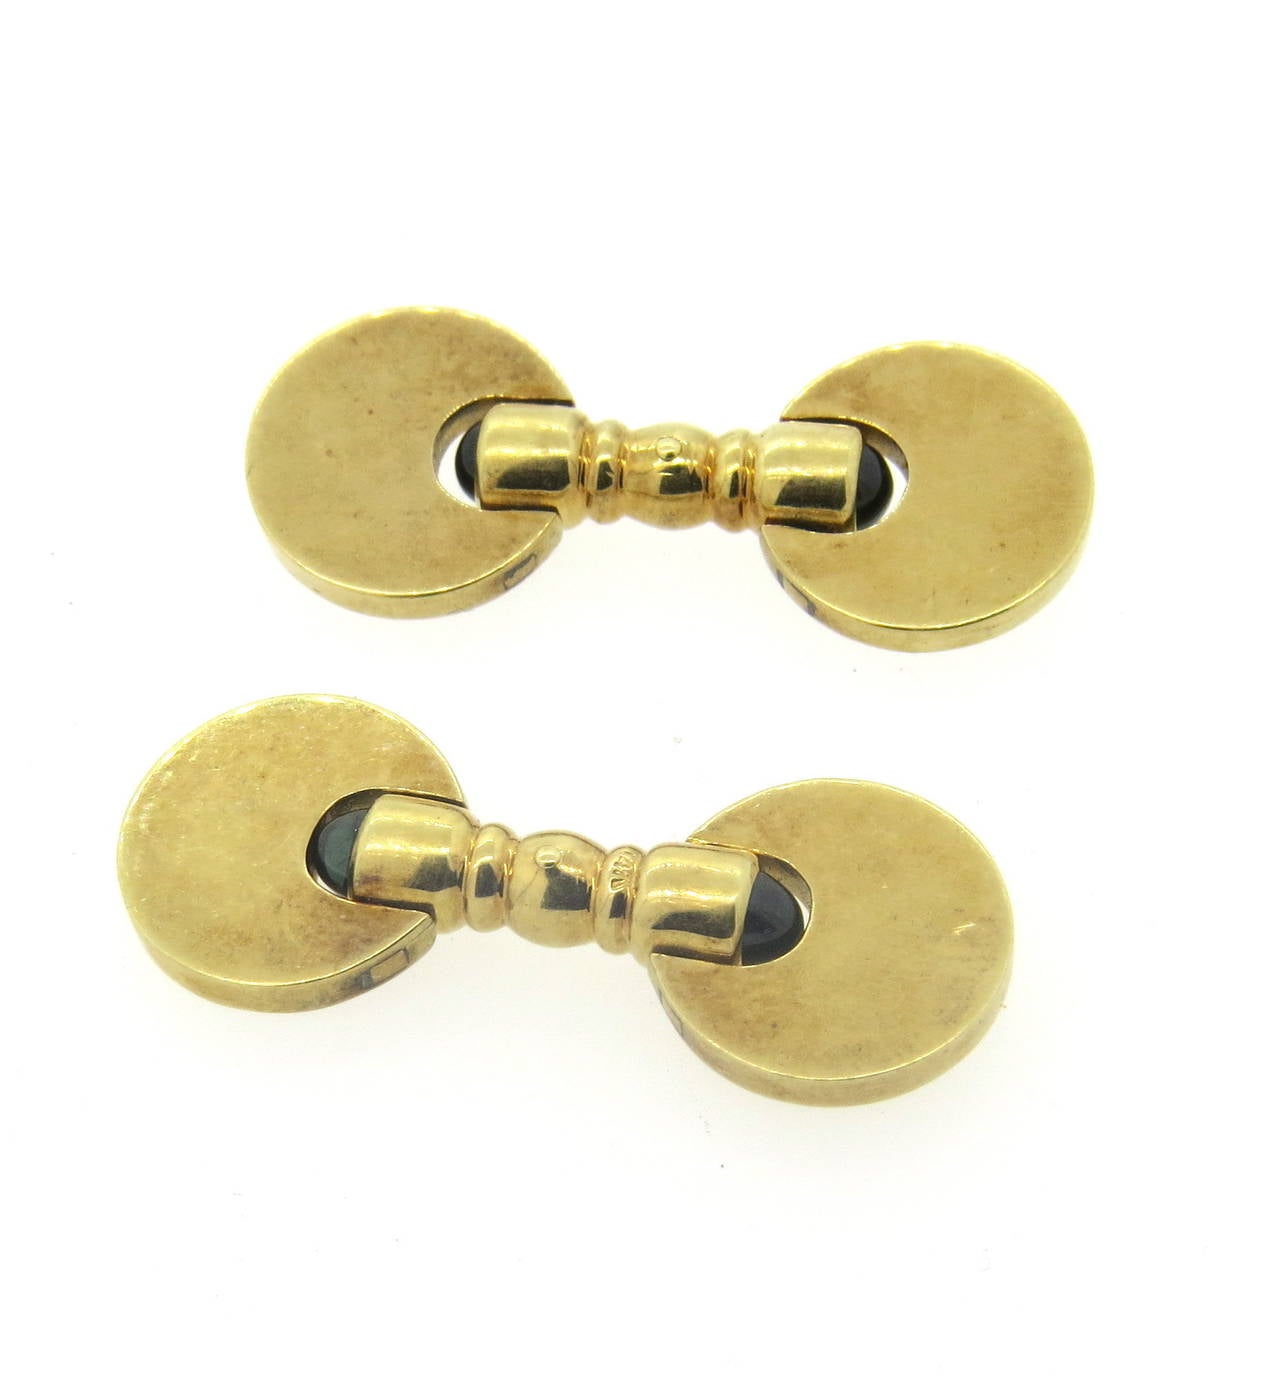 A pair of 14k yellow gold cufflinks set with sapphire cabochons.  Cufflinks measure 14mm in diameter.  The weight of the cufflinks is 20 grams.  Marked: 14k.